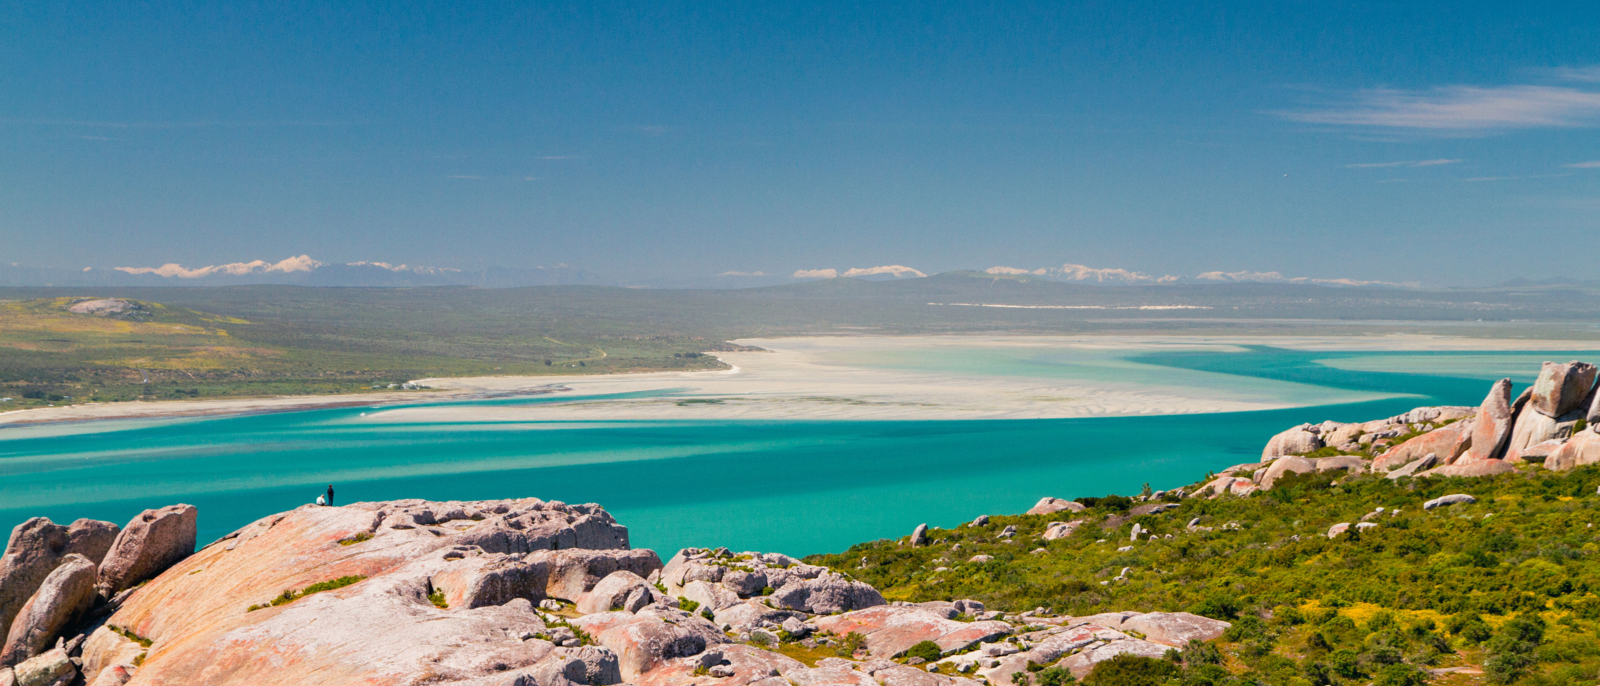 01 The snow-capped Cederberg mountains and turquoise waters of the Langebaan Lagoon. West Coast National Park, South Africa